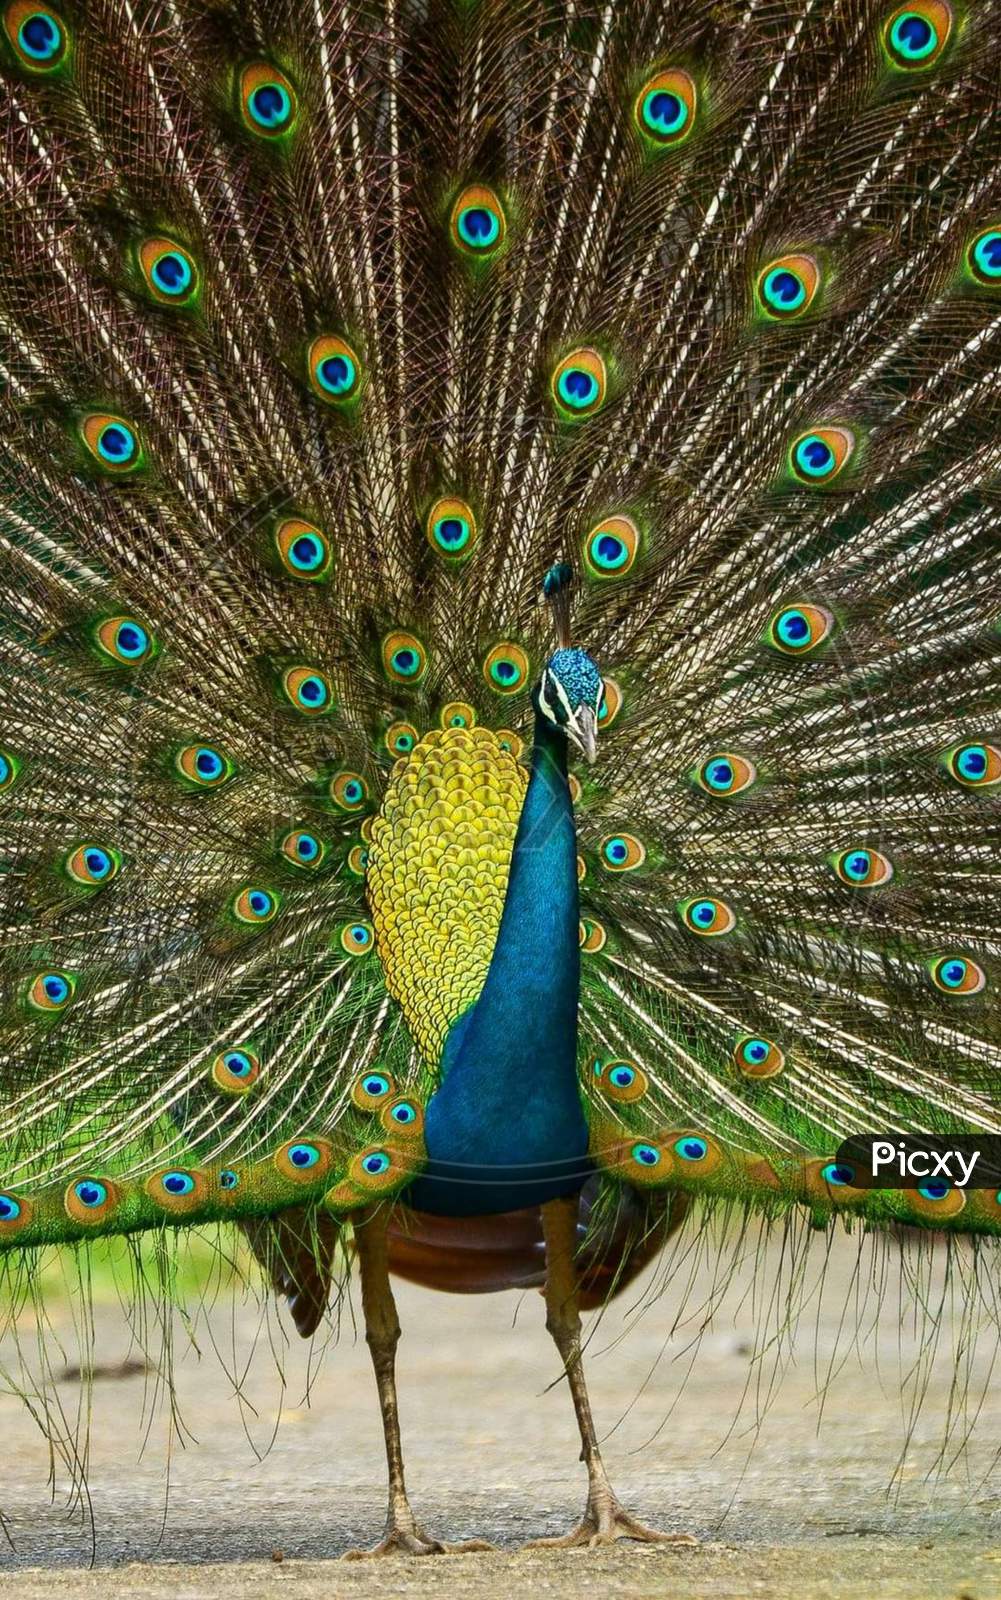 Extreme close shot of a indian peacock